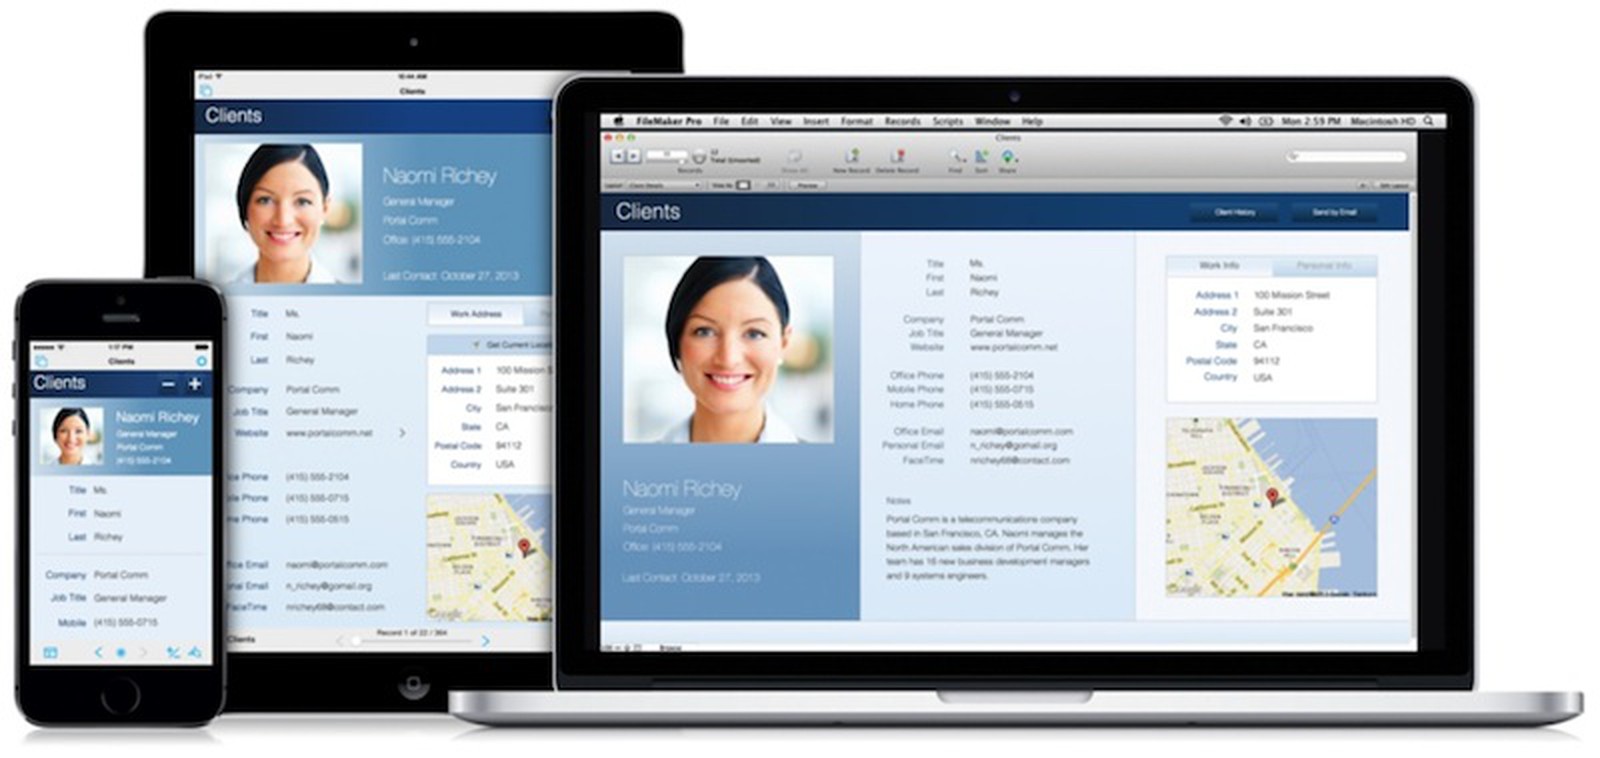 filemaker pro 12 for ipad